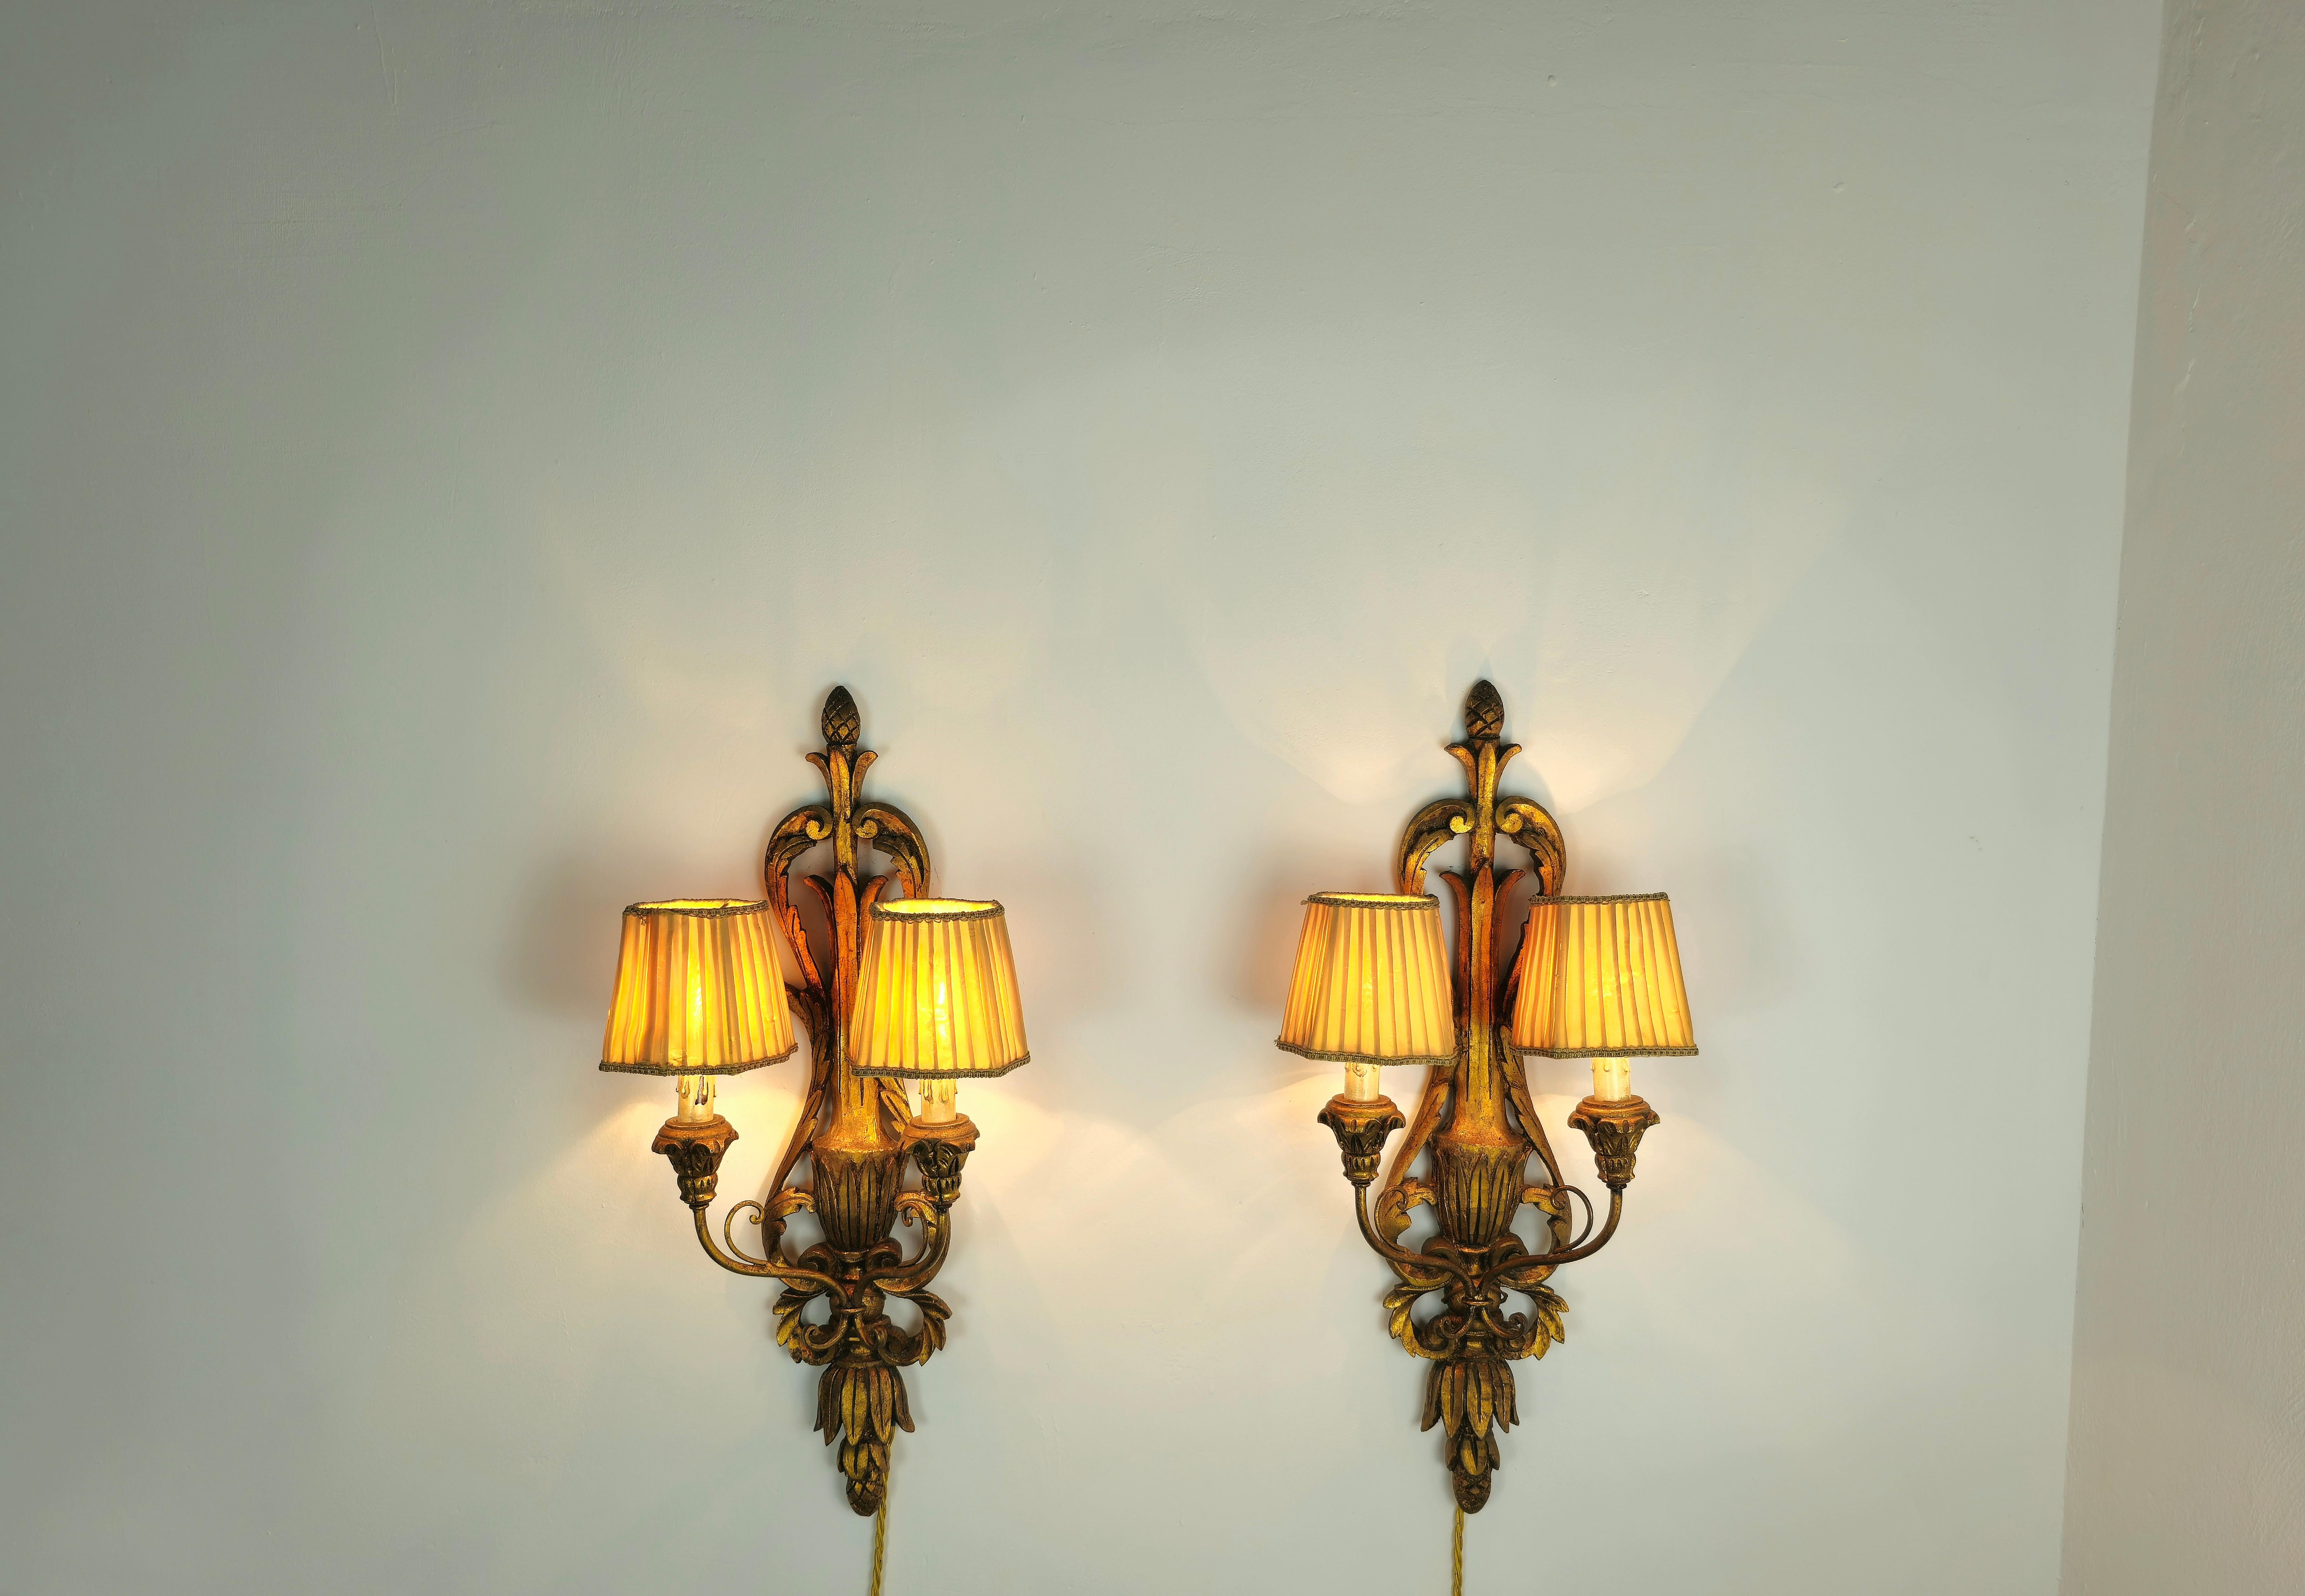 Pair of Wall Lights Sconces Wood Carved Silk Midcentury Italian Design 1950s  For Sale 5